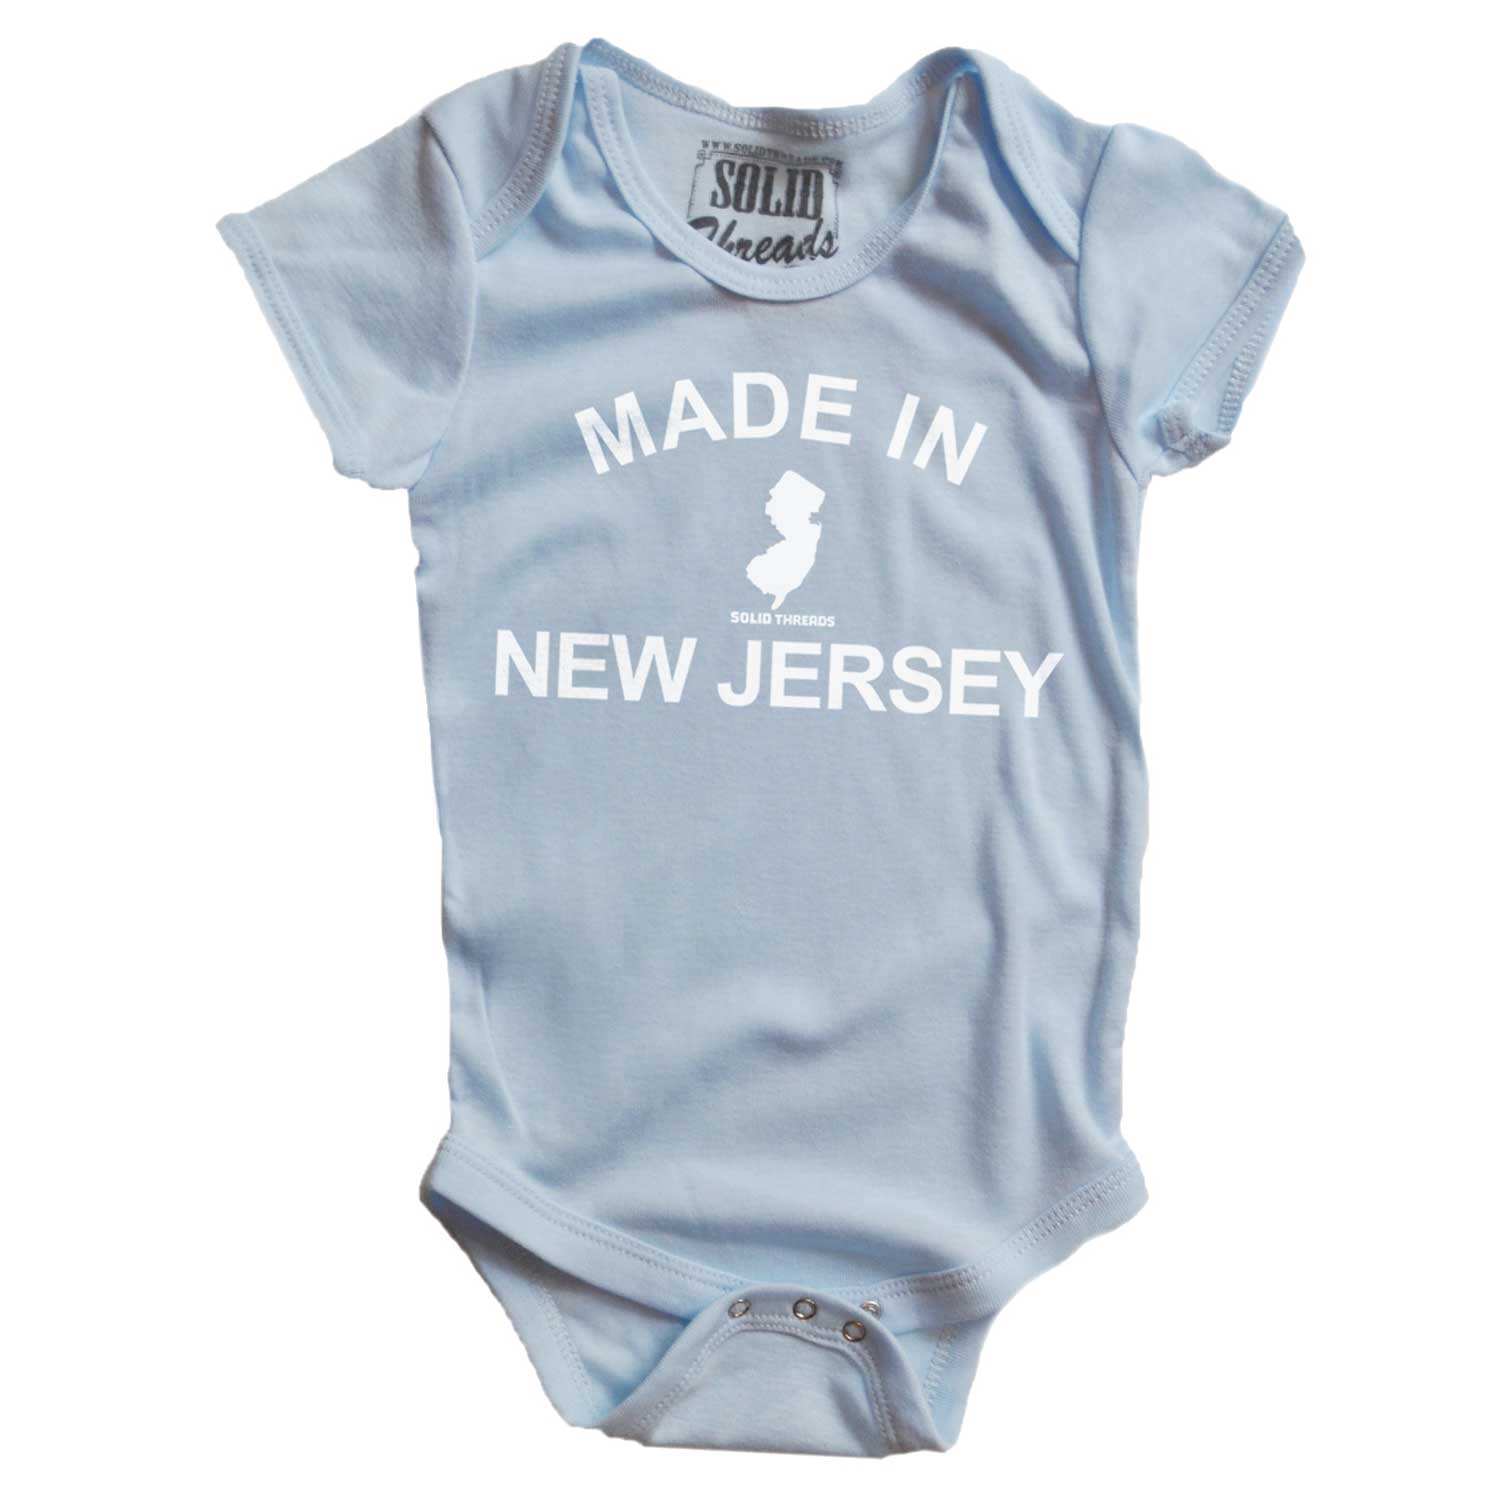 Baby Made New Jersey Cool Graphic One Piece | Retro Garden State Light Blue Romper | Solid Threads